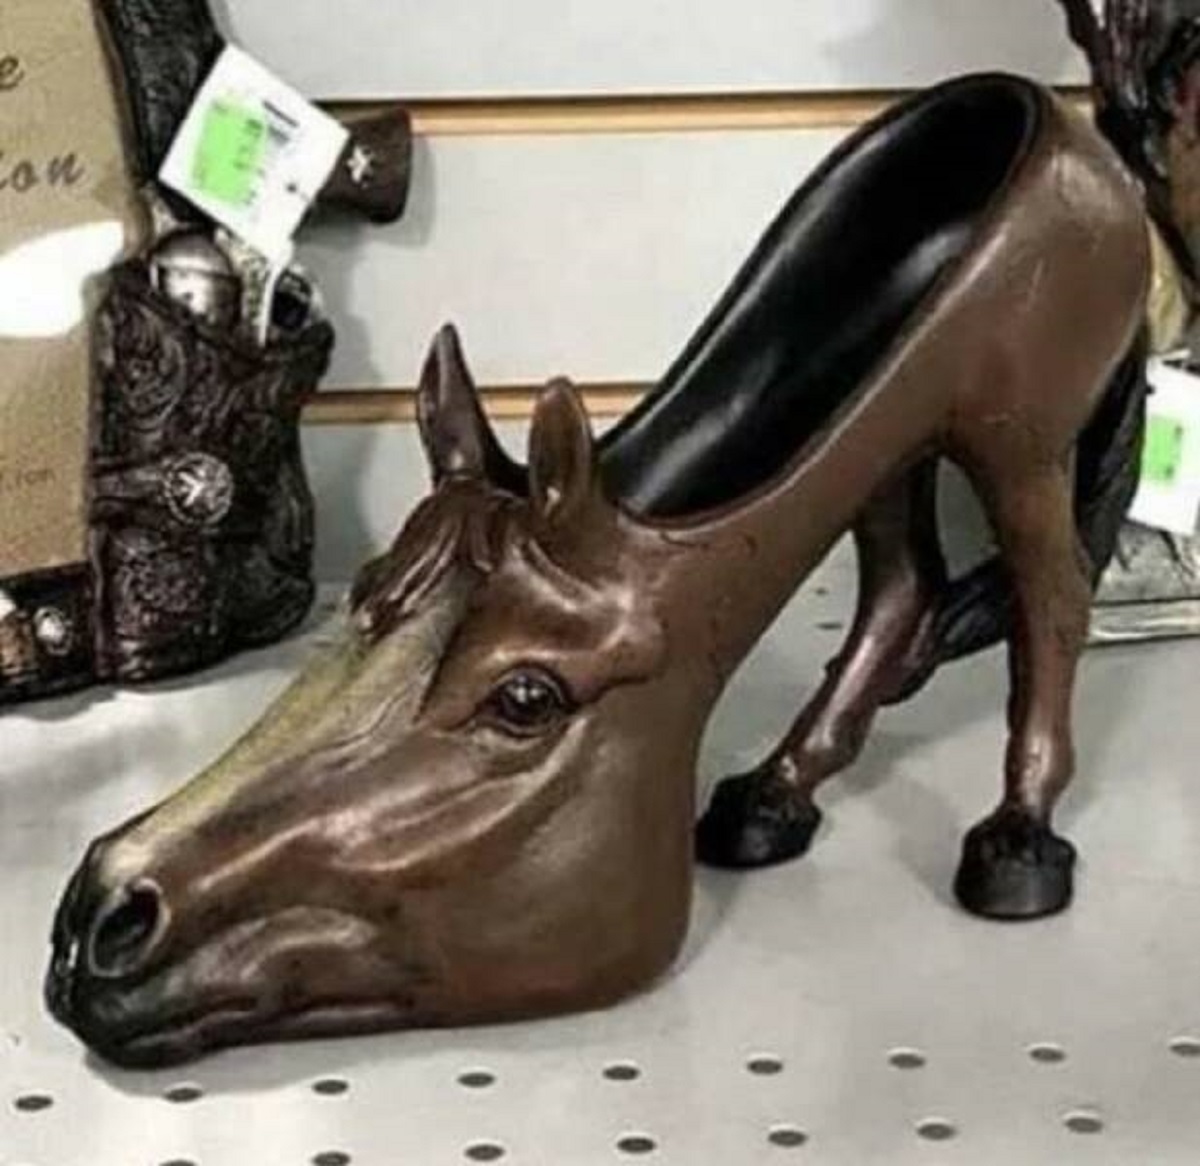 You have to really be into horses to wear something this hiddeous.